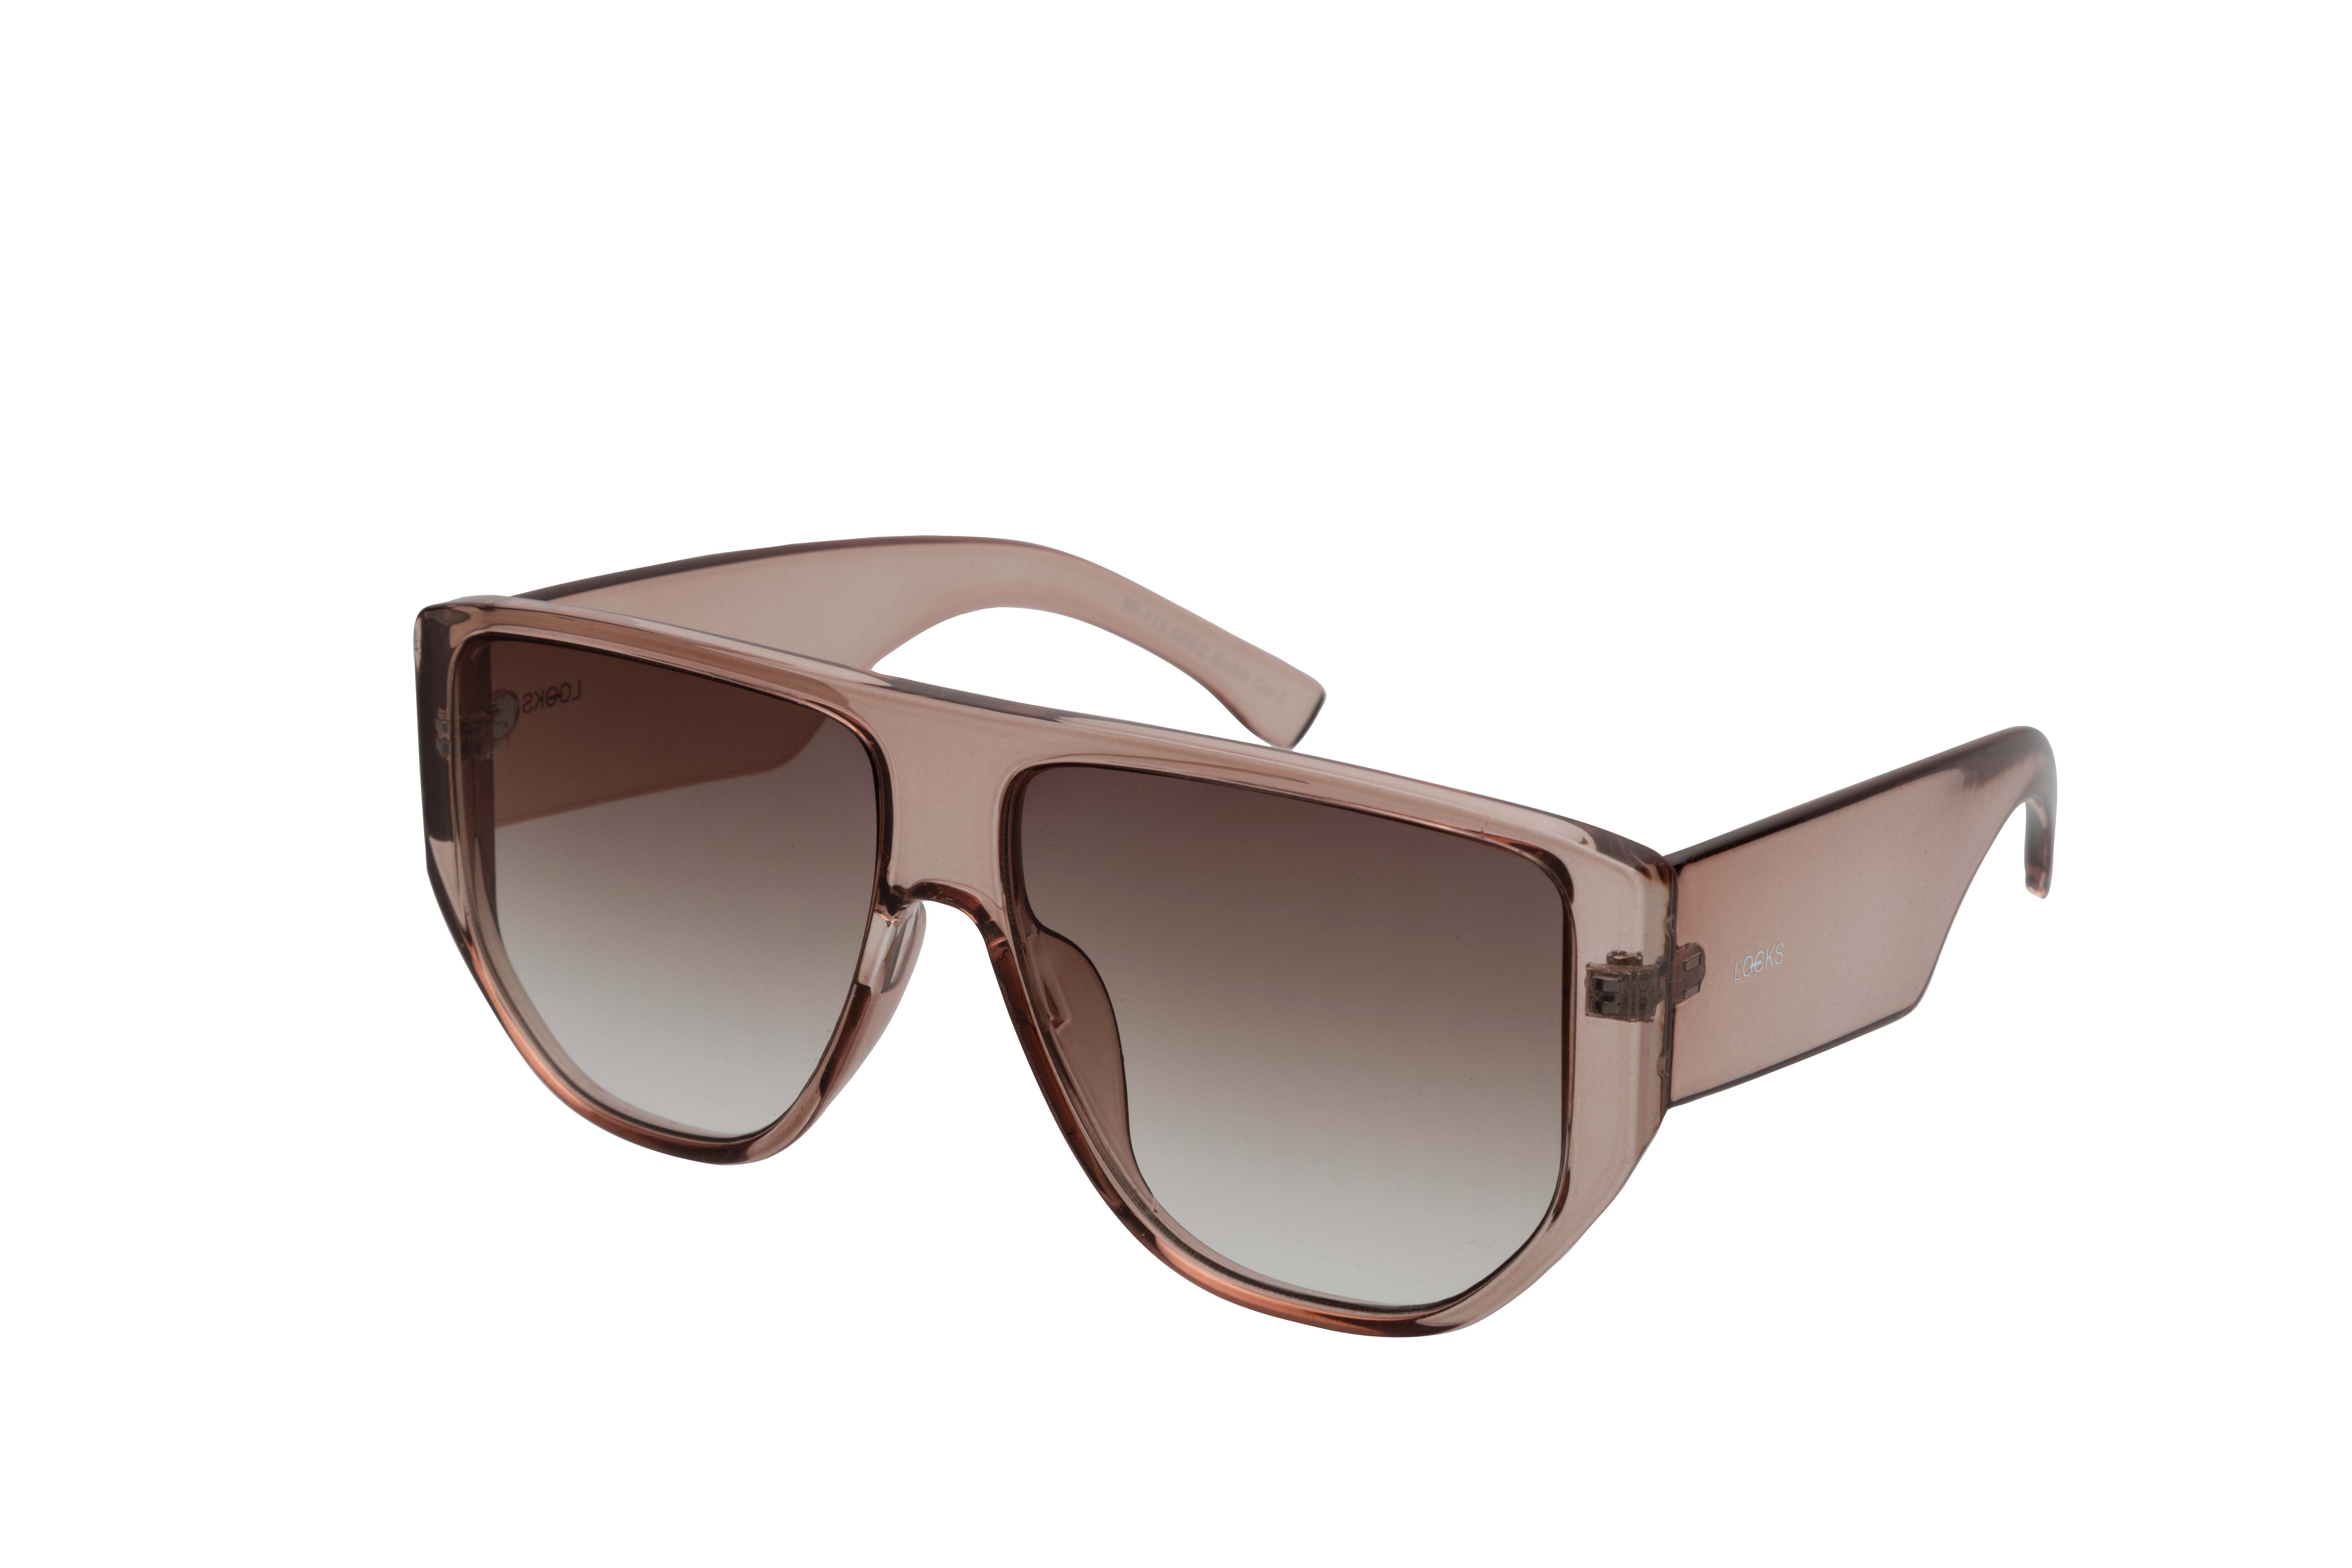 Futura Luxe Shade SP-713 | LOOKS by Wolfgang Joop